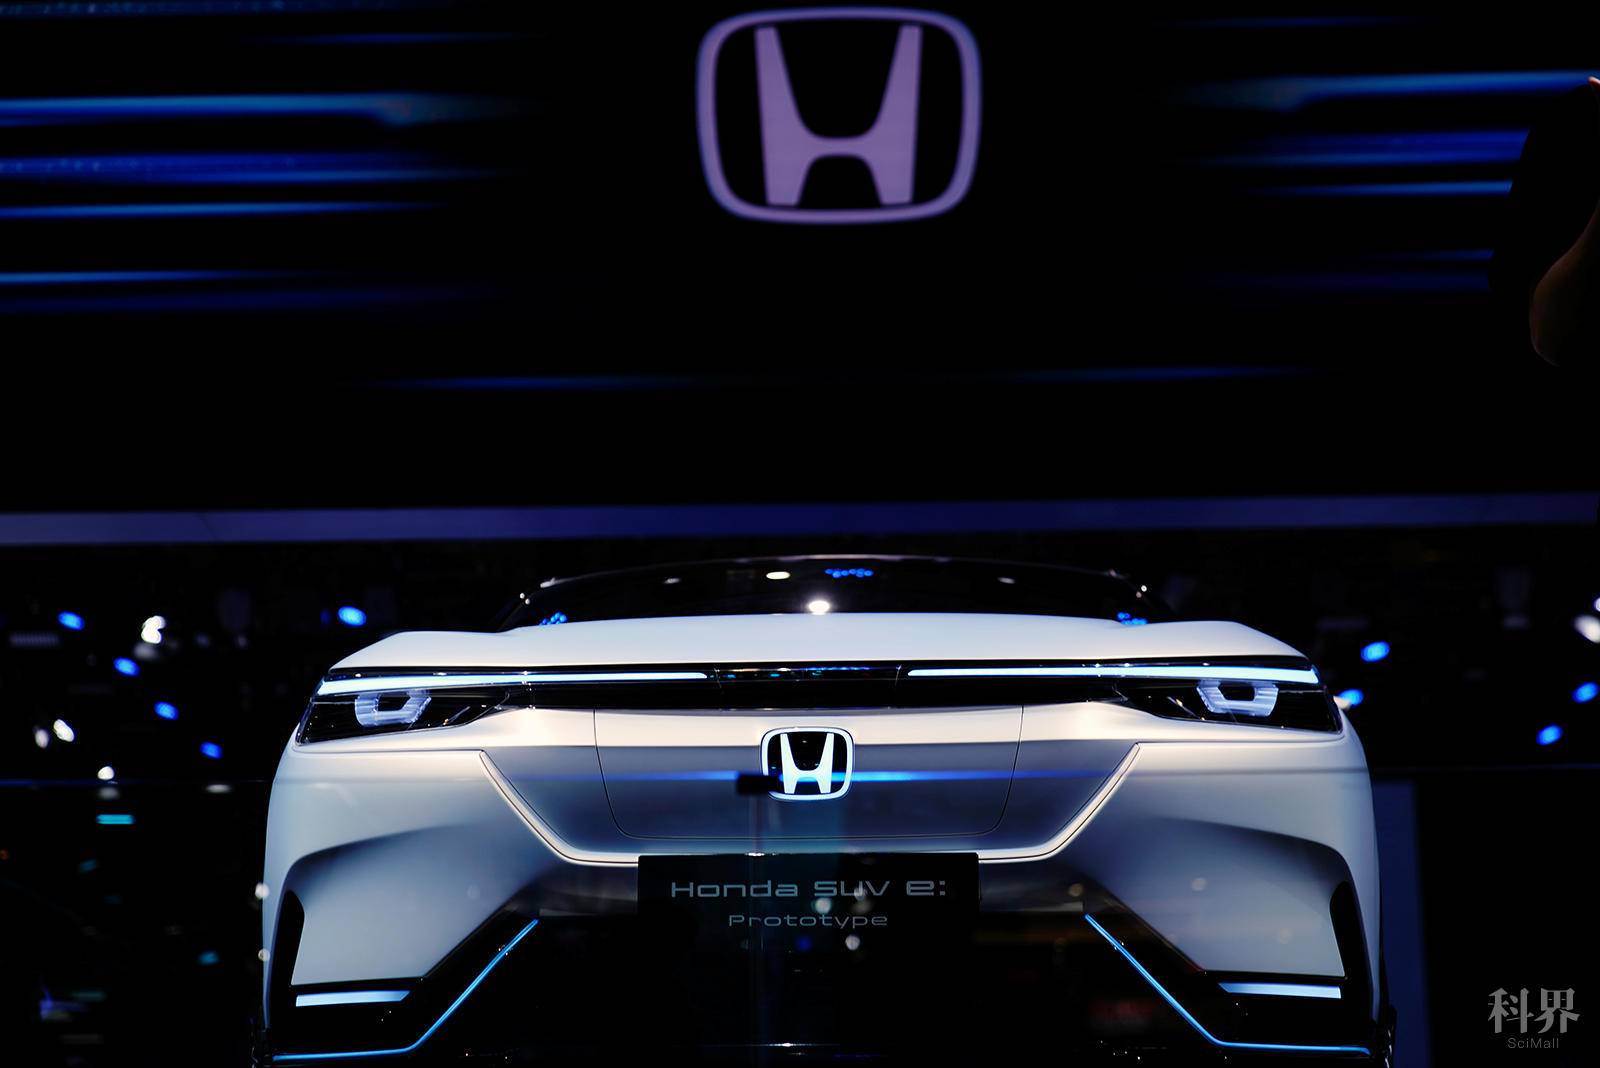 A Honda SUV e:Prototype electric vehicle (EV) is seen displayed during a media day for the Auto Shanghai show in Shanghai, China April 20, 2021. REUTERS/Aly Song - RC2IZM9QHXO4